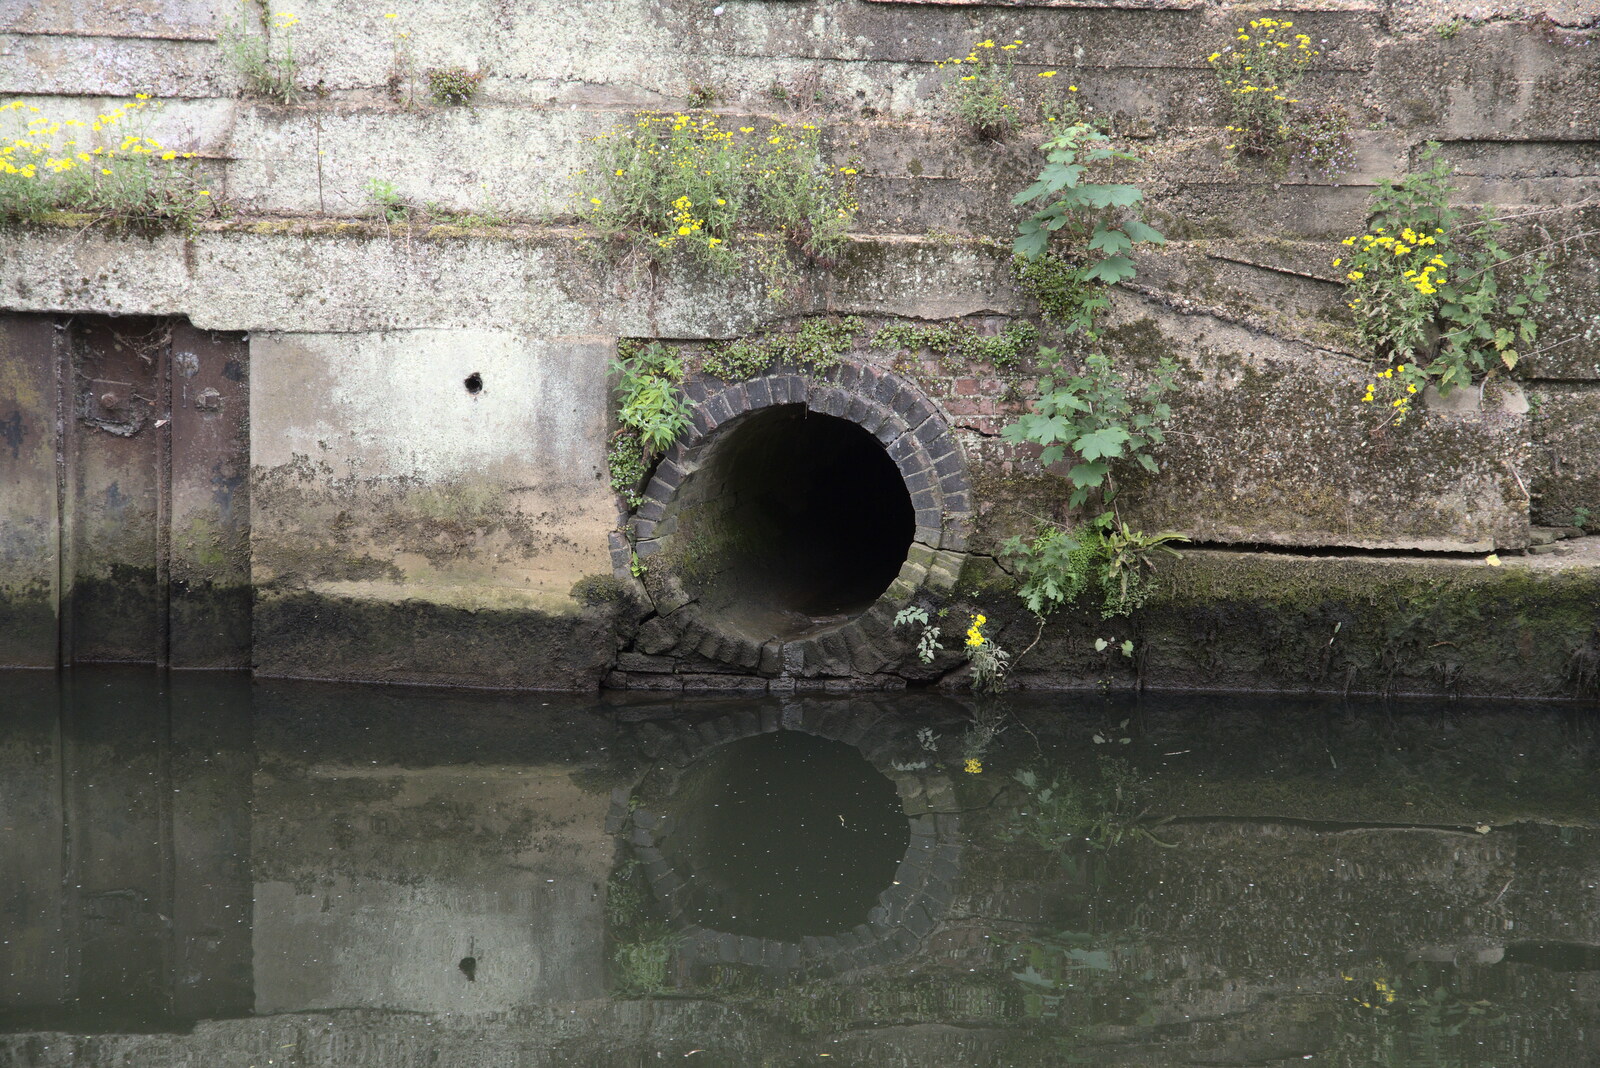 An old Victorian sewer from Discovering the Hidden City: Norwich, Norfolk - 23rd May 2022